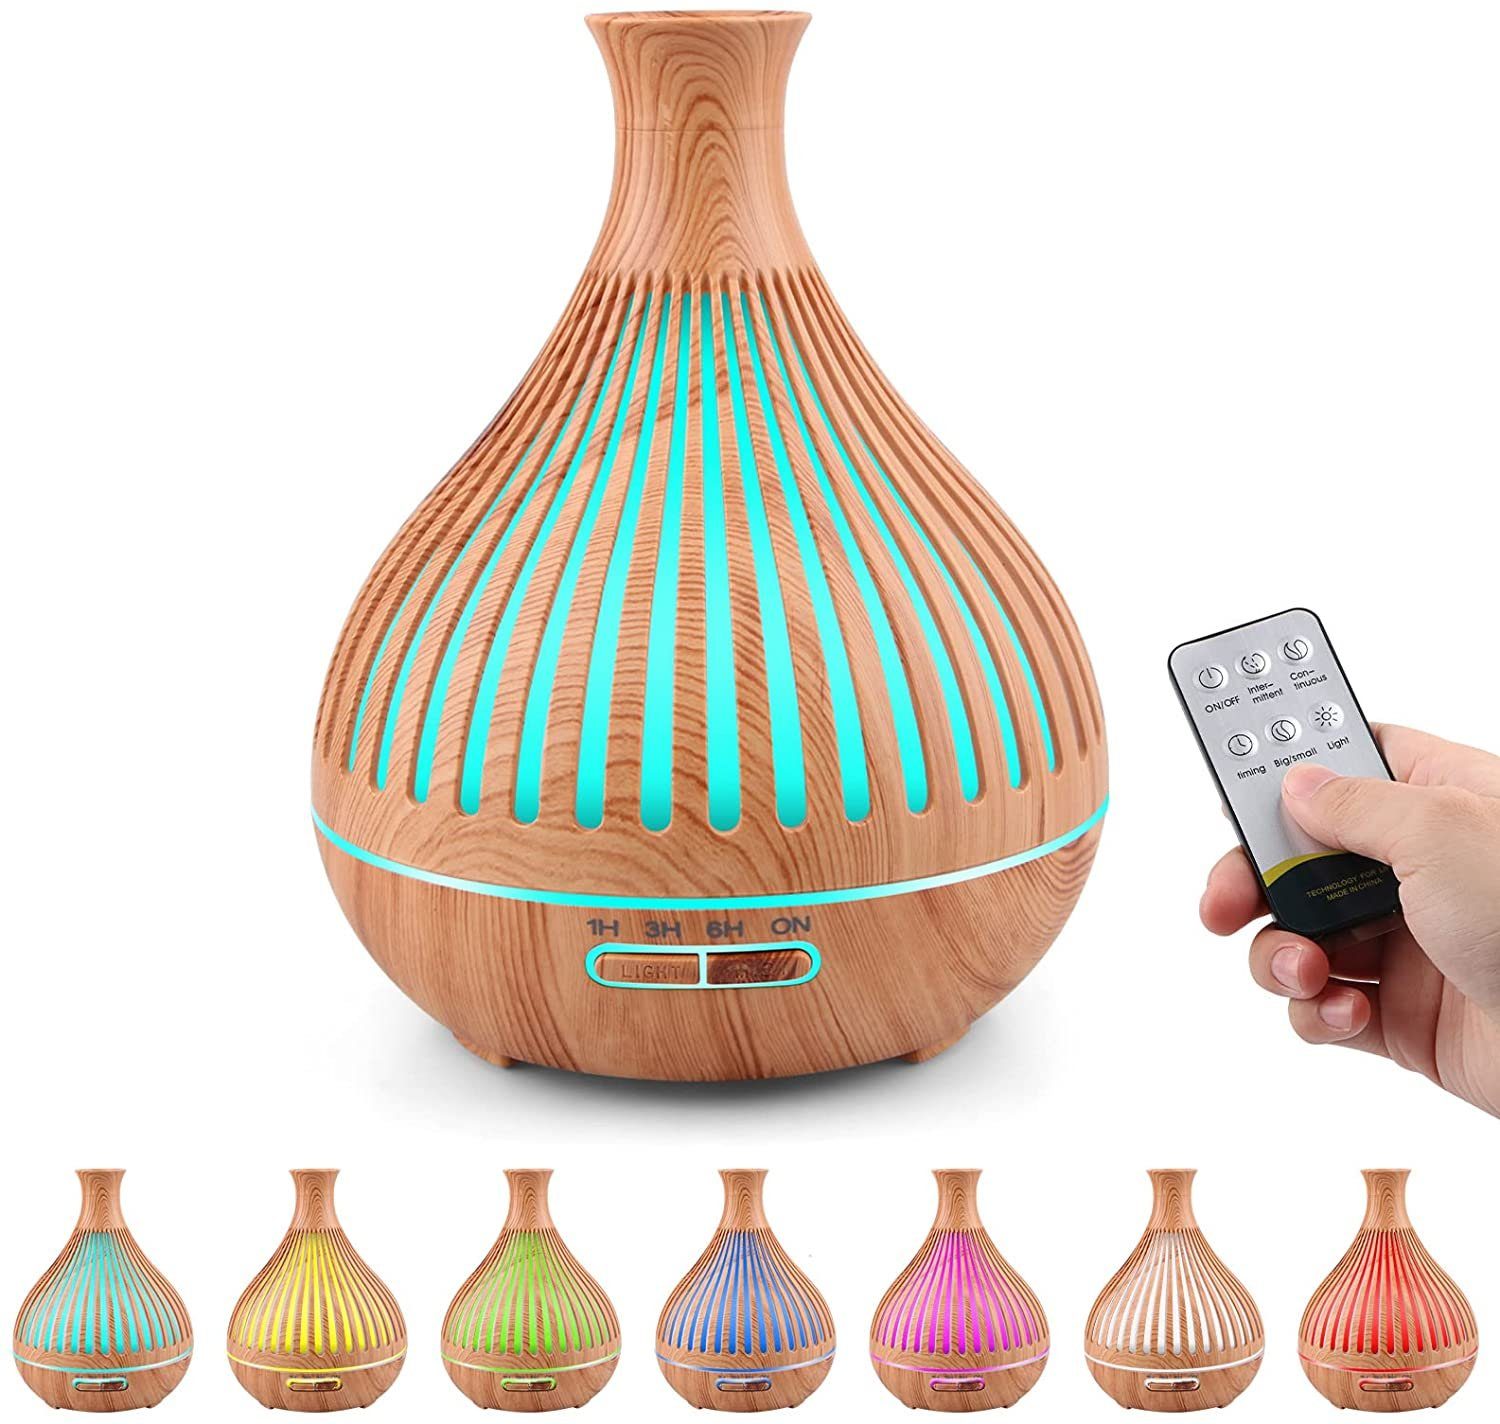 LED Ultraschall Luftbefeuchter Aroma Diffuser Aromatherapie Duftlampe Farbe 